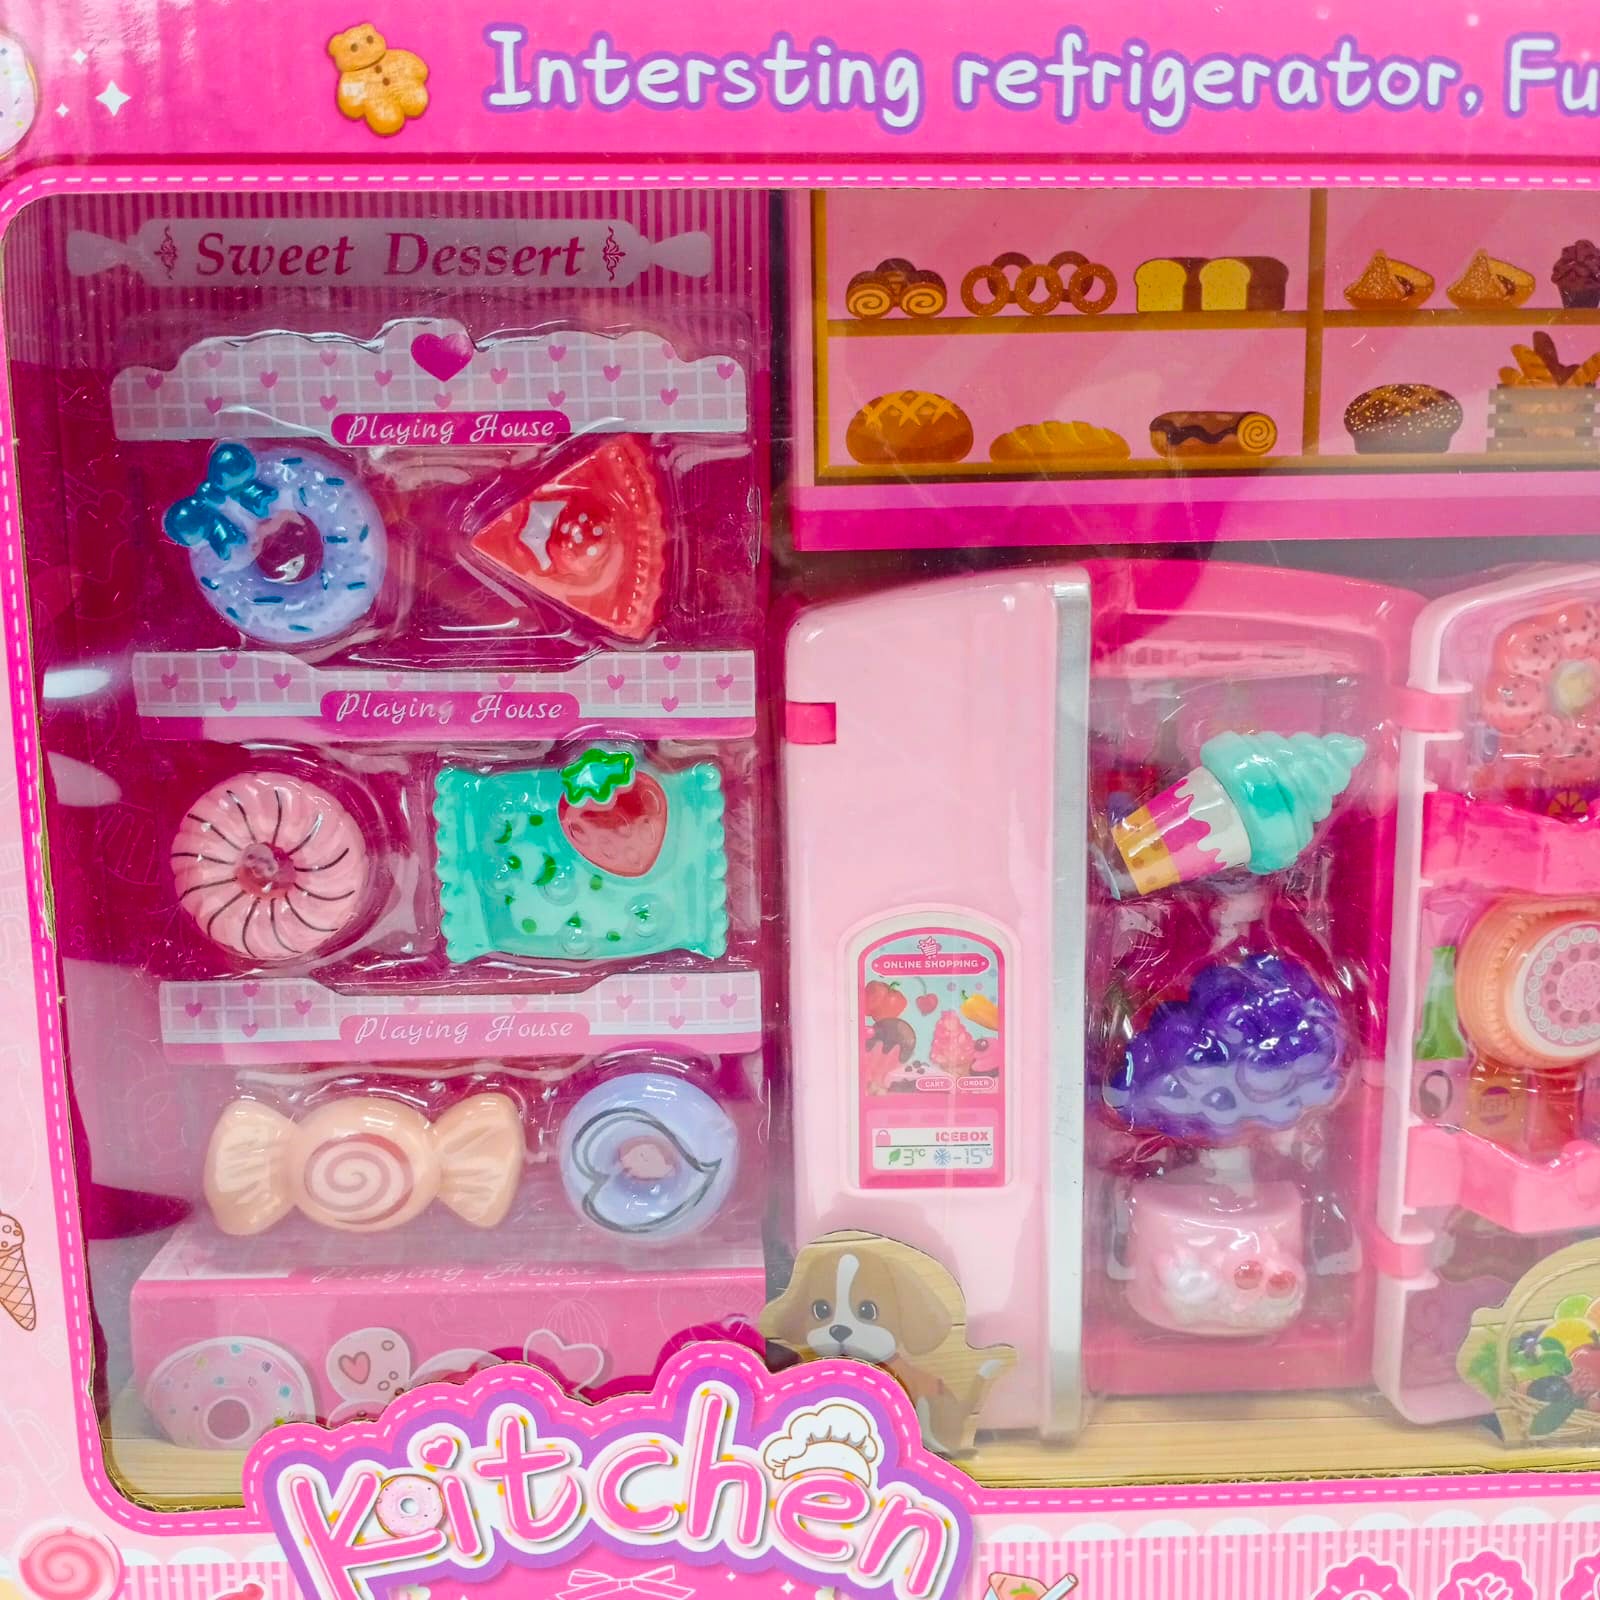 Interesting Refrigerator, Fun For Child Play Kitchen Play House For Kids And Child Entertainment